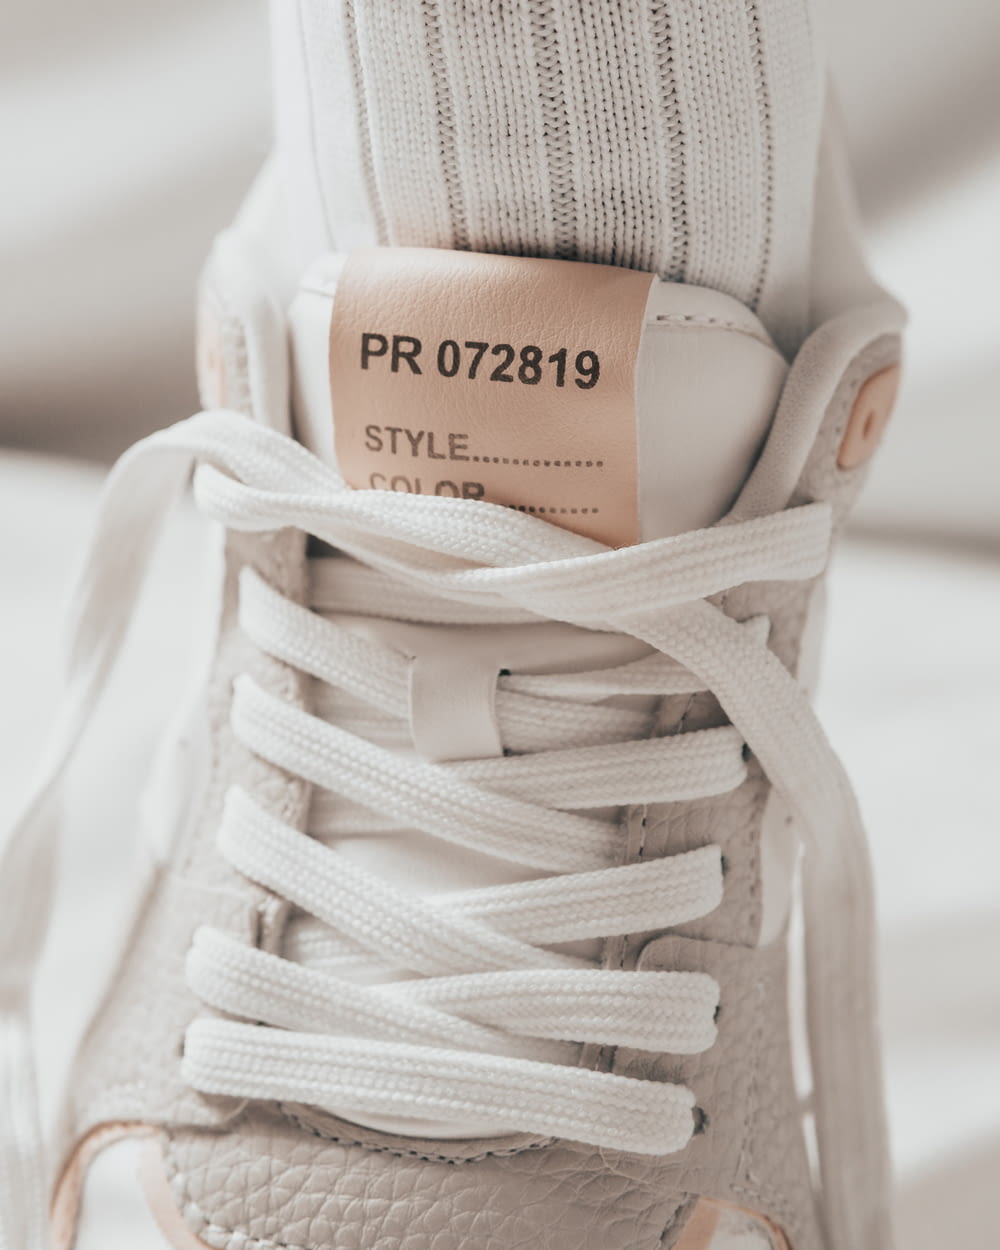 a pair of white sneakers with a label on them